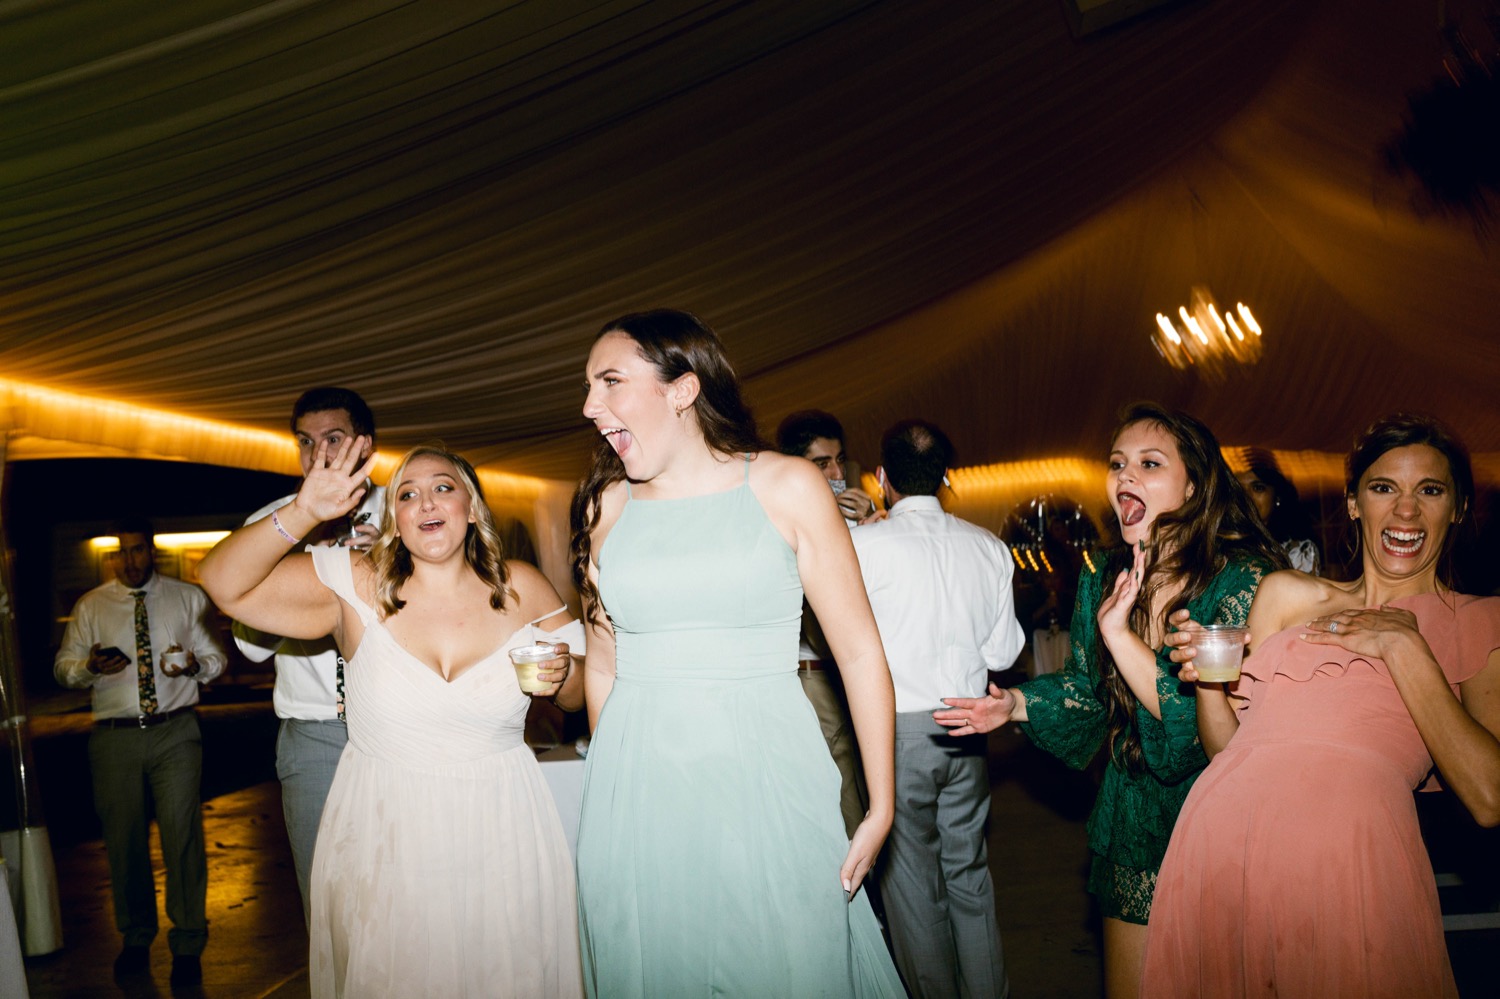 group dancing together at wedding reception